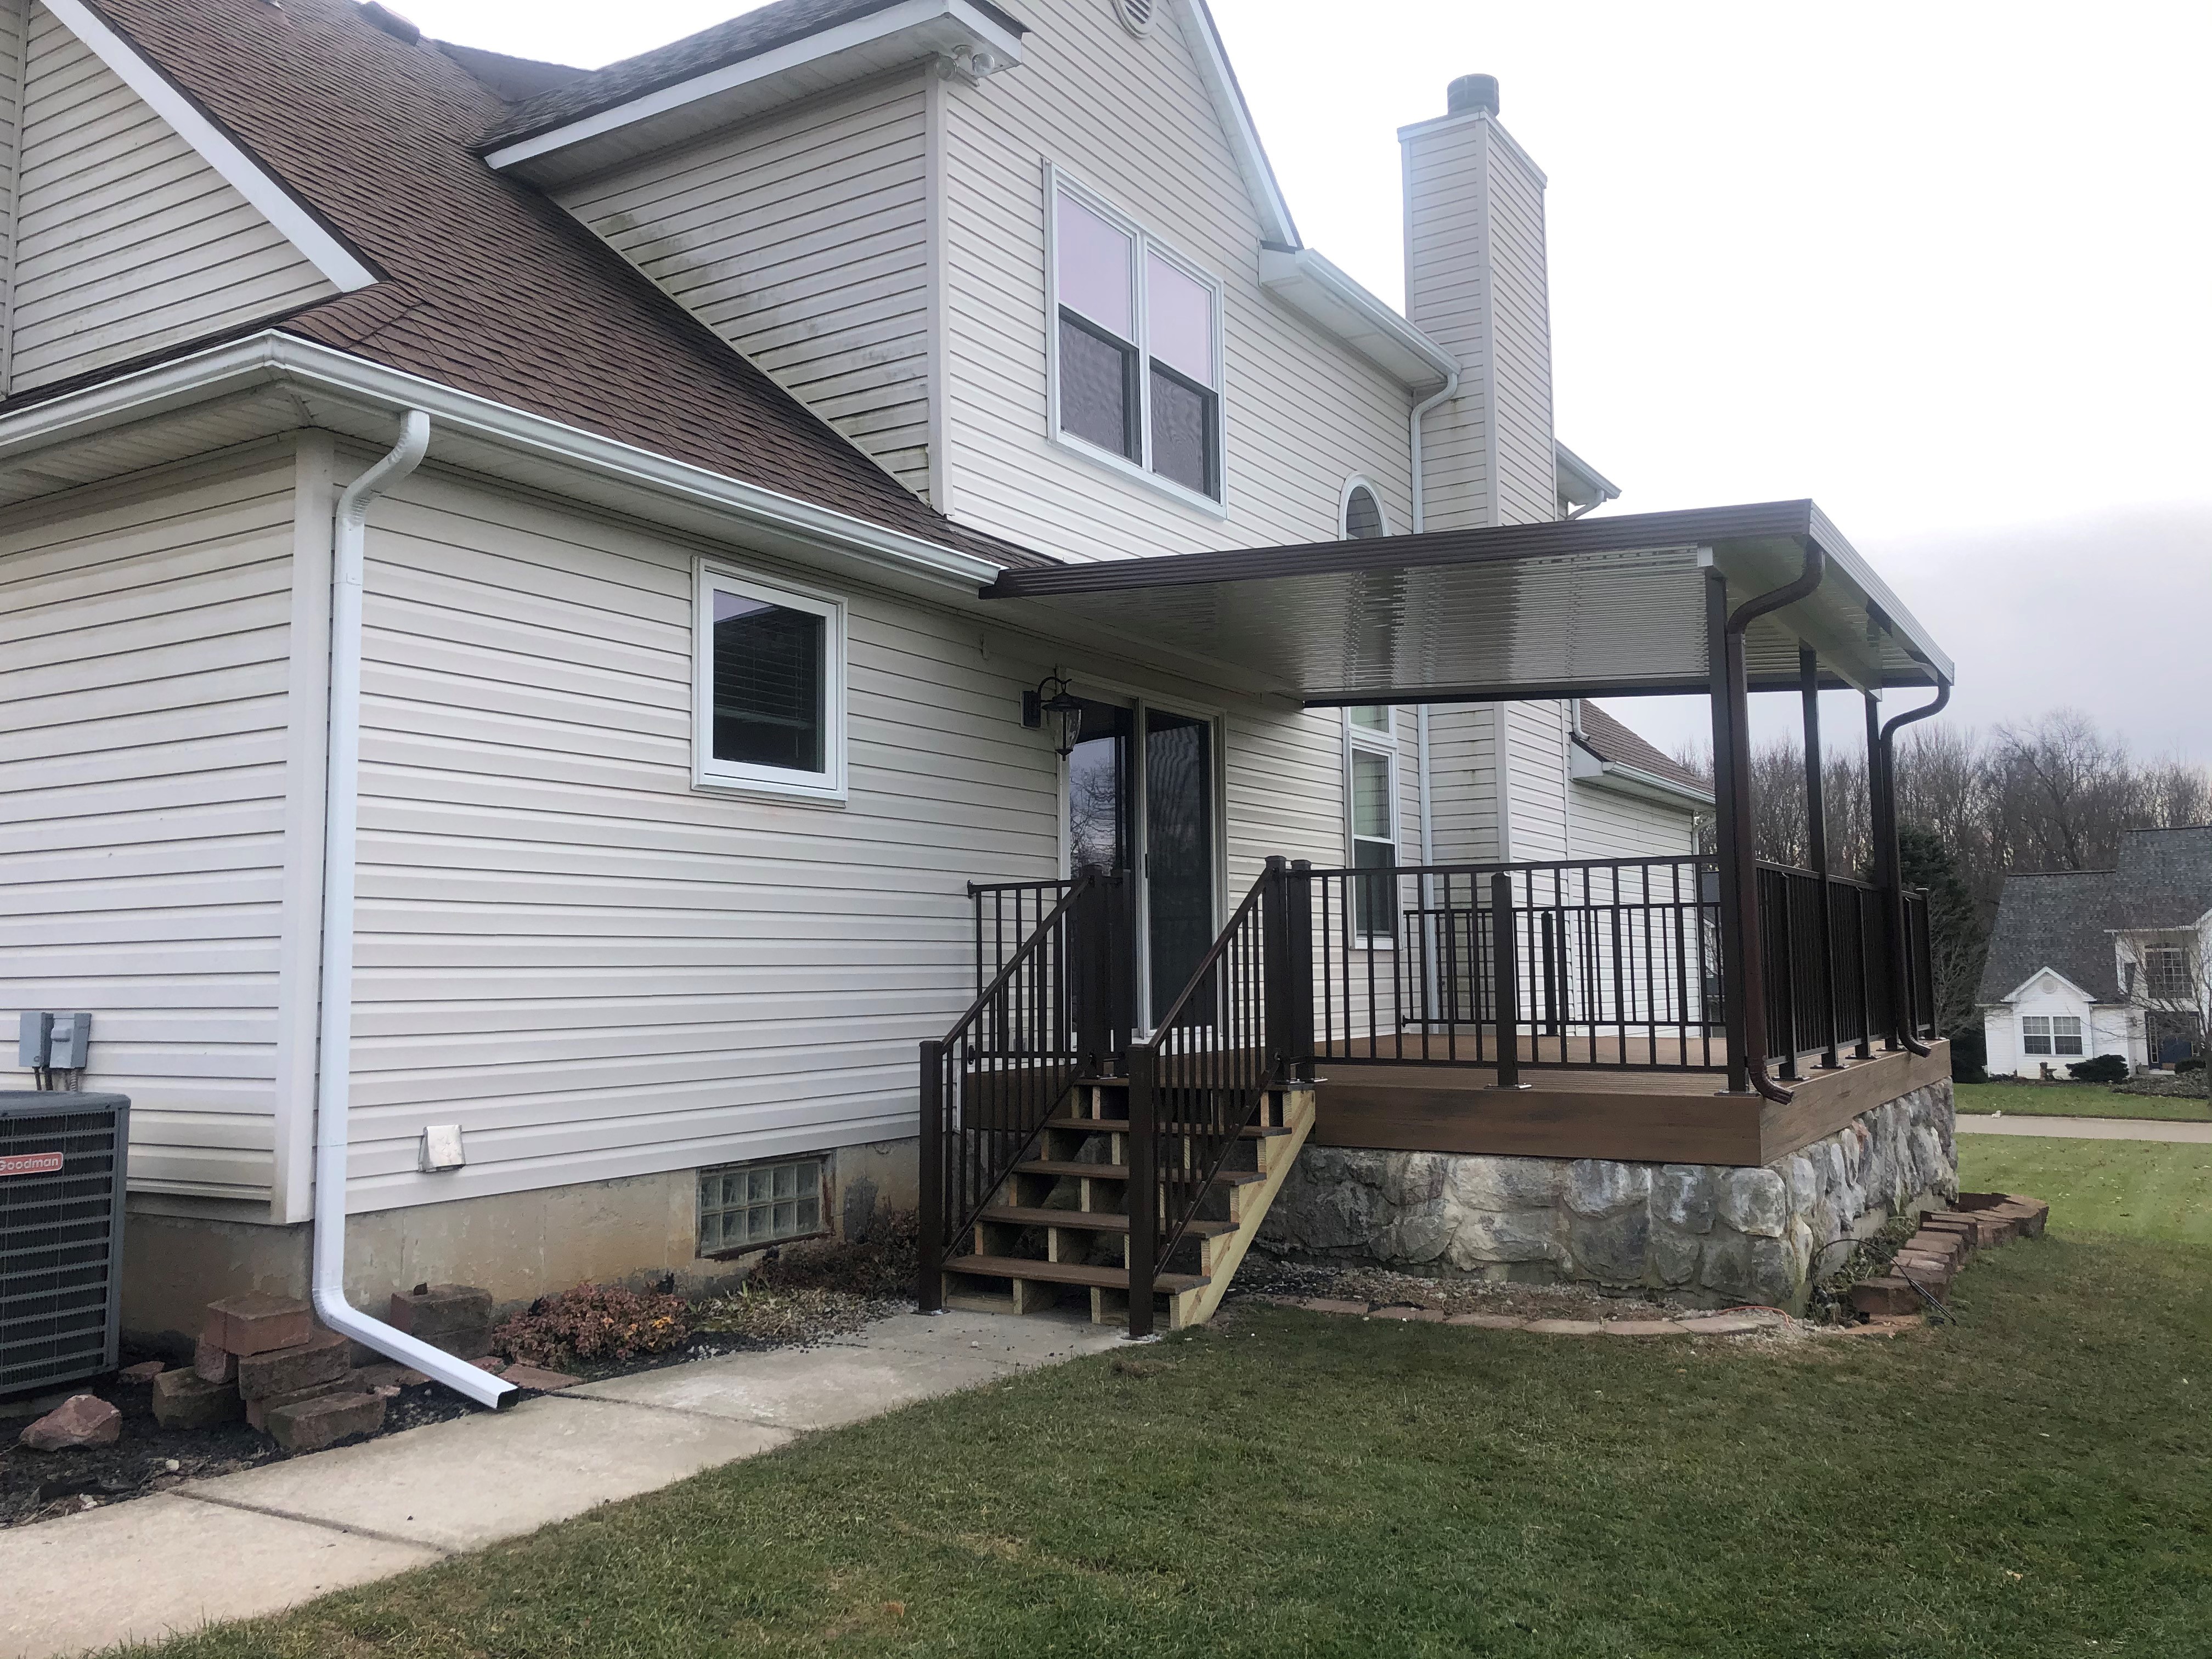 Livonia & Allen Park's top choice for roofing, siding, gutter, door, and window replacement. We're the only call you need to make!  Contact us today for details or to schedule a consultation!